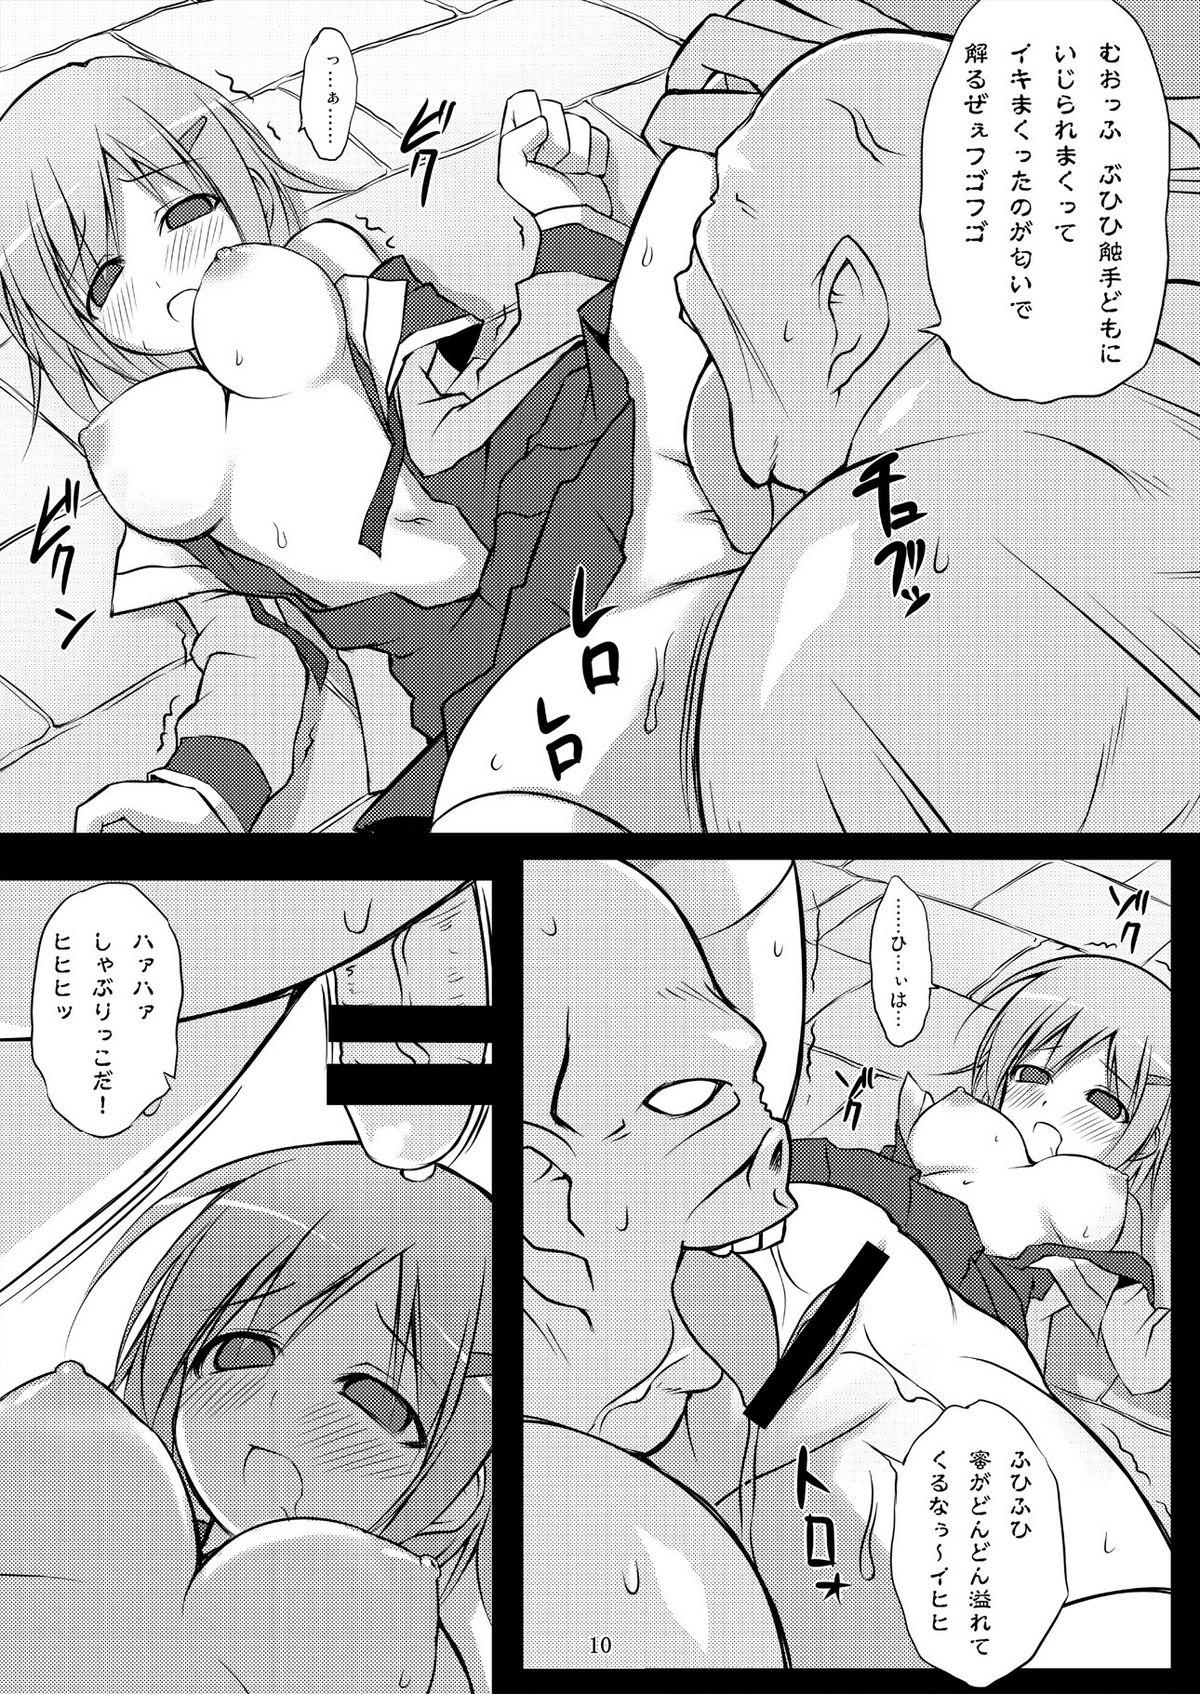 Pawg 魔法戦士触獄に堕つ～獄卒の洗礼～ Gay - Page 10